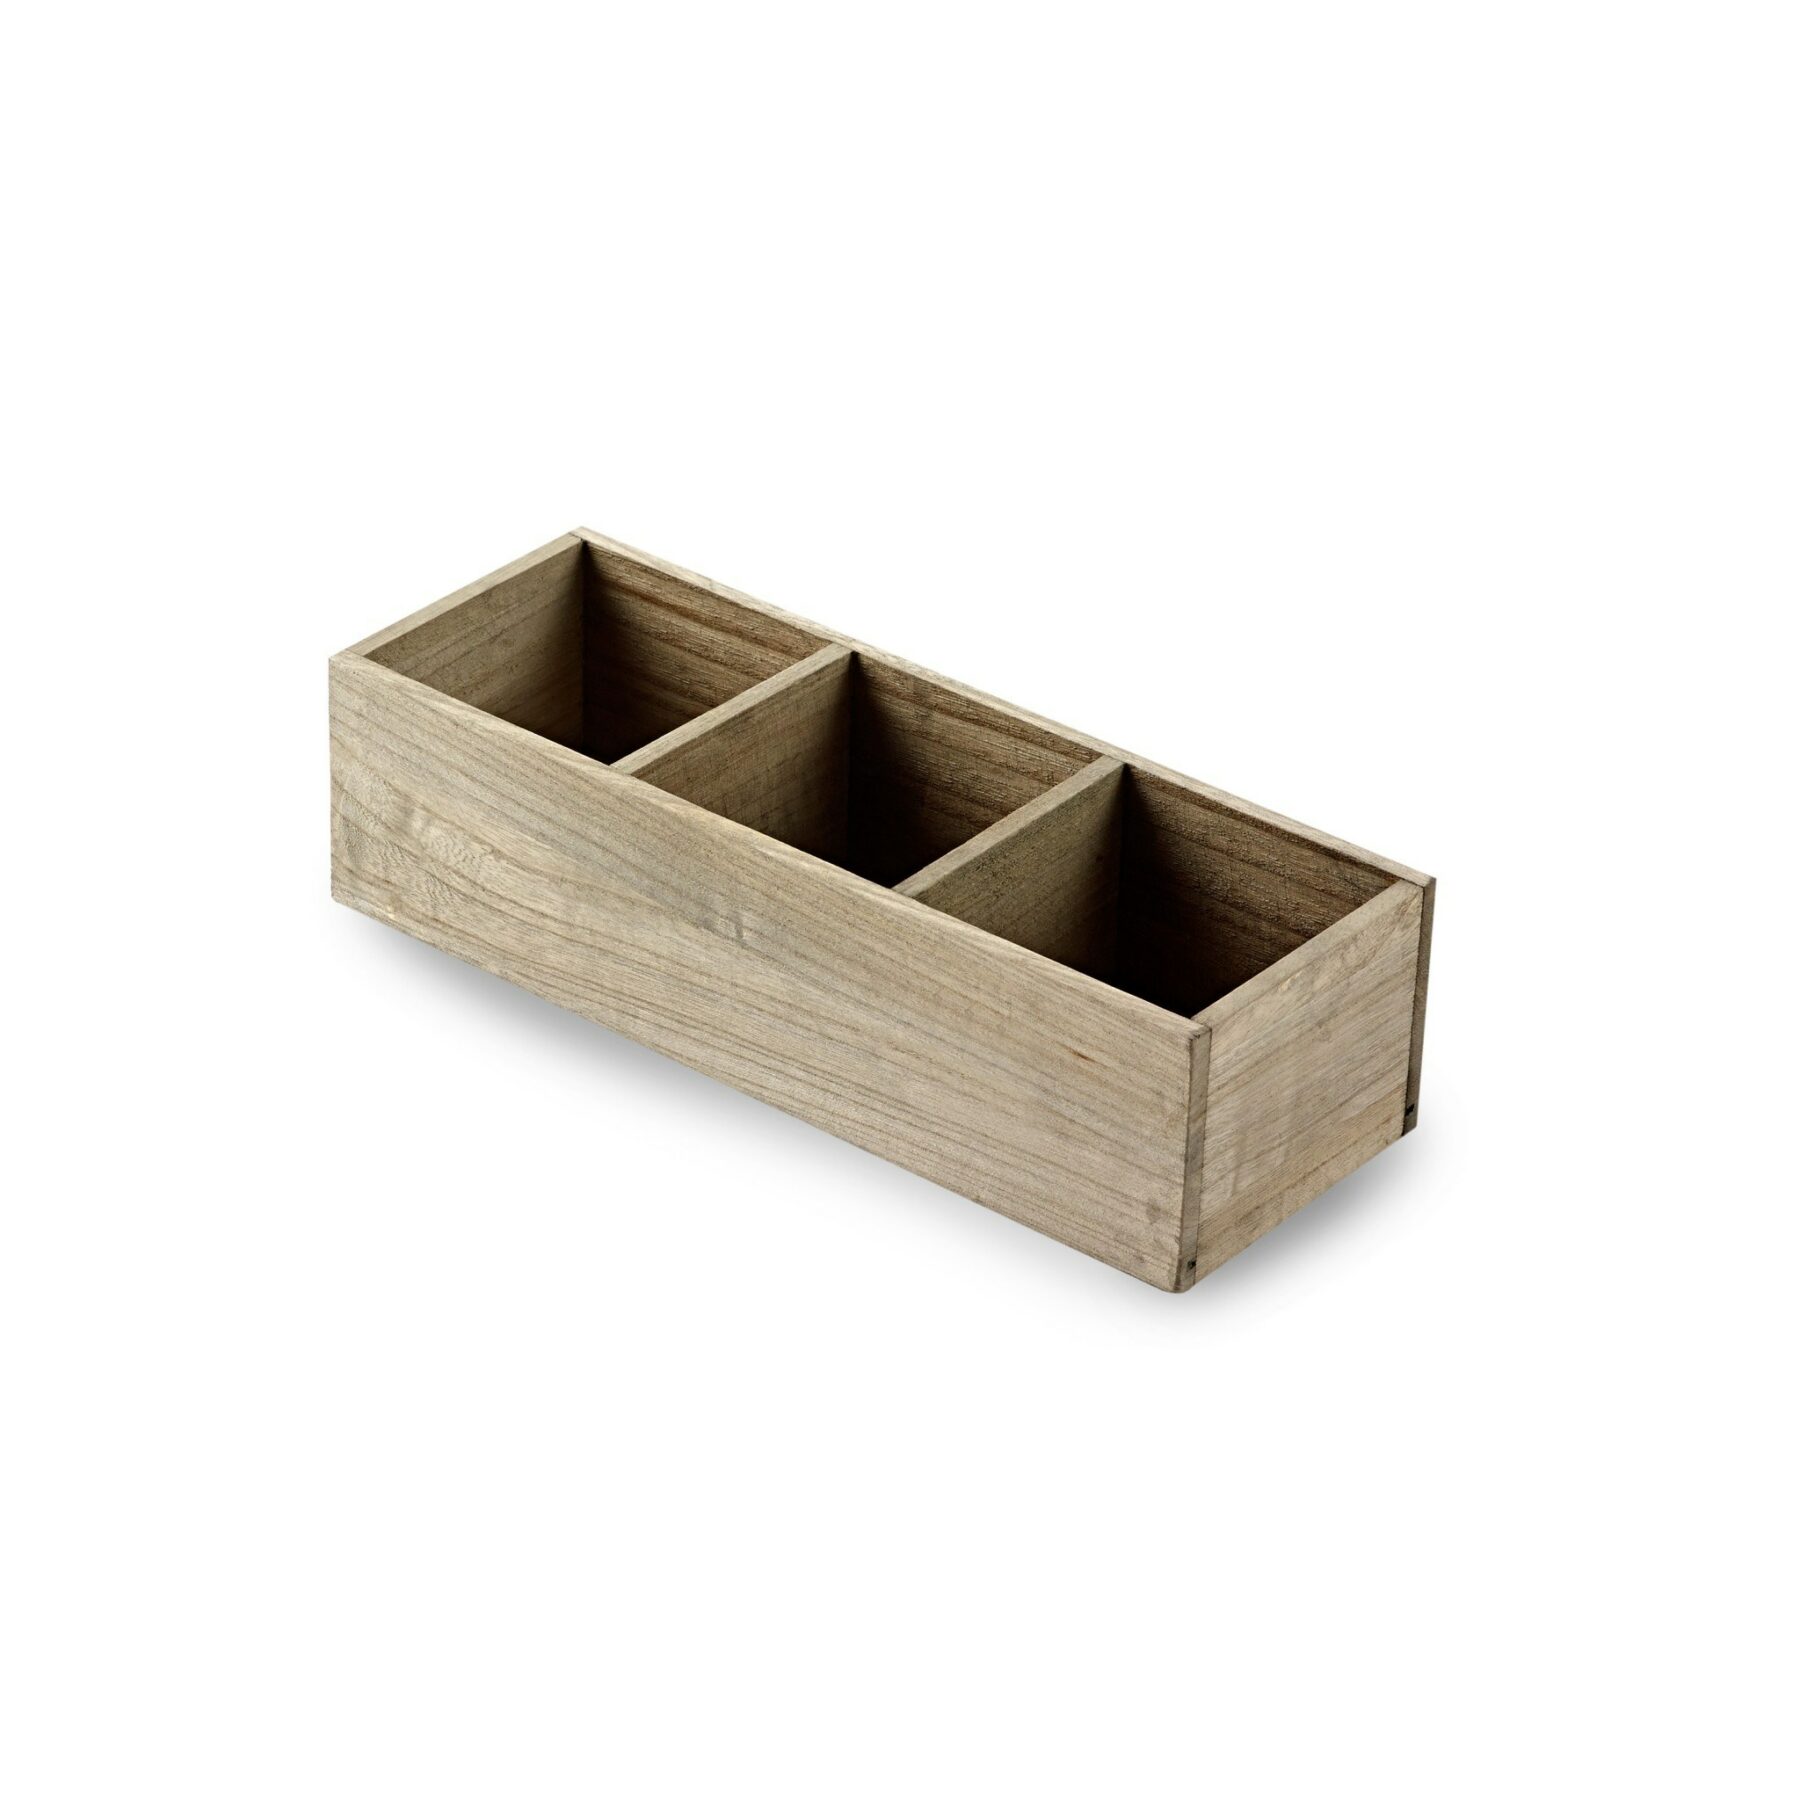 Wooden Storage Box with Dividers